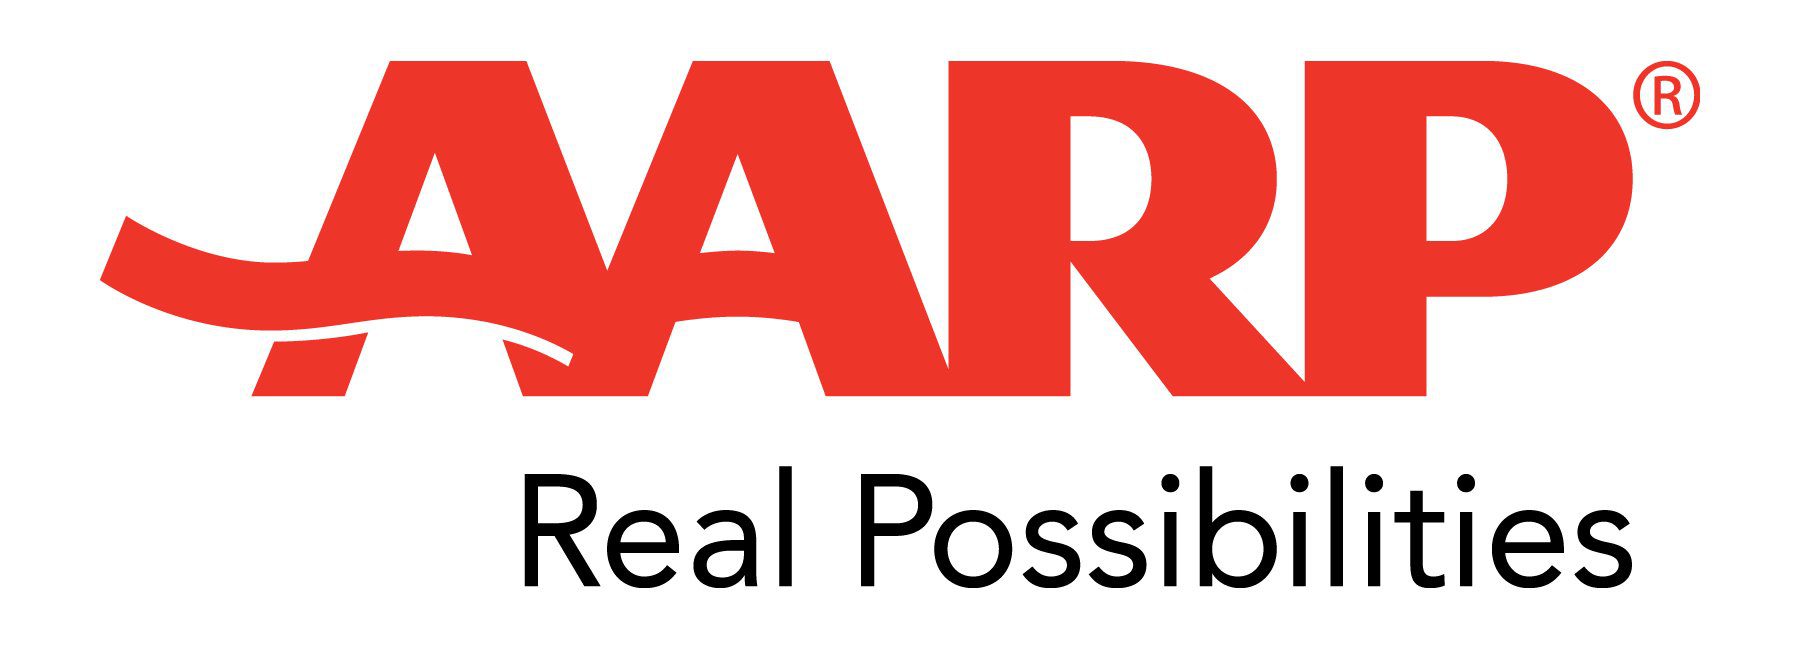 AARP Real Possibilities logo large size